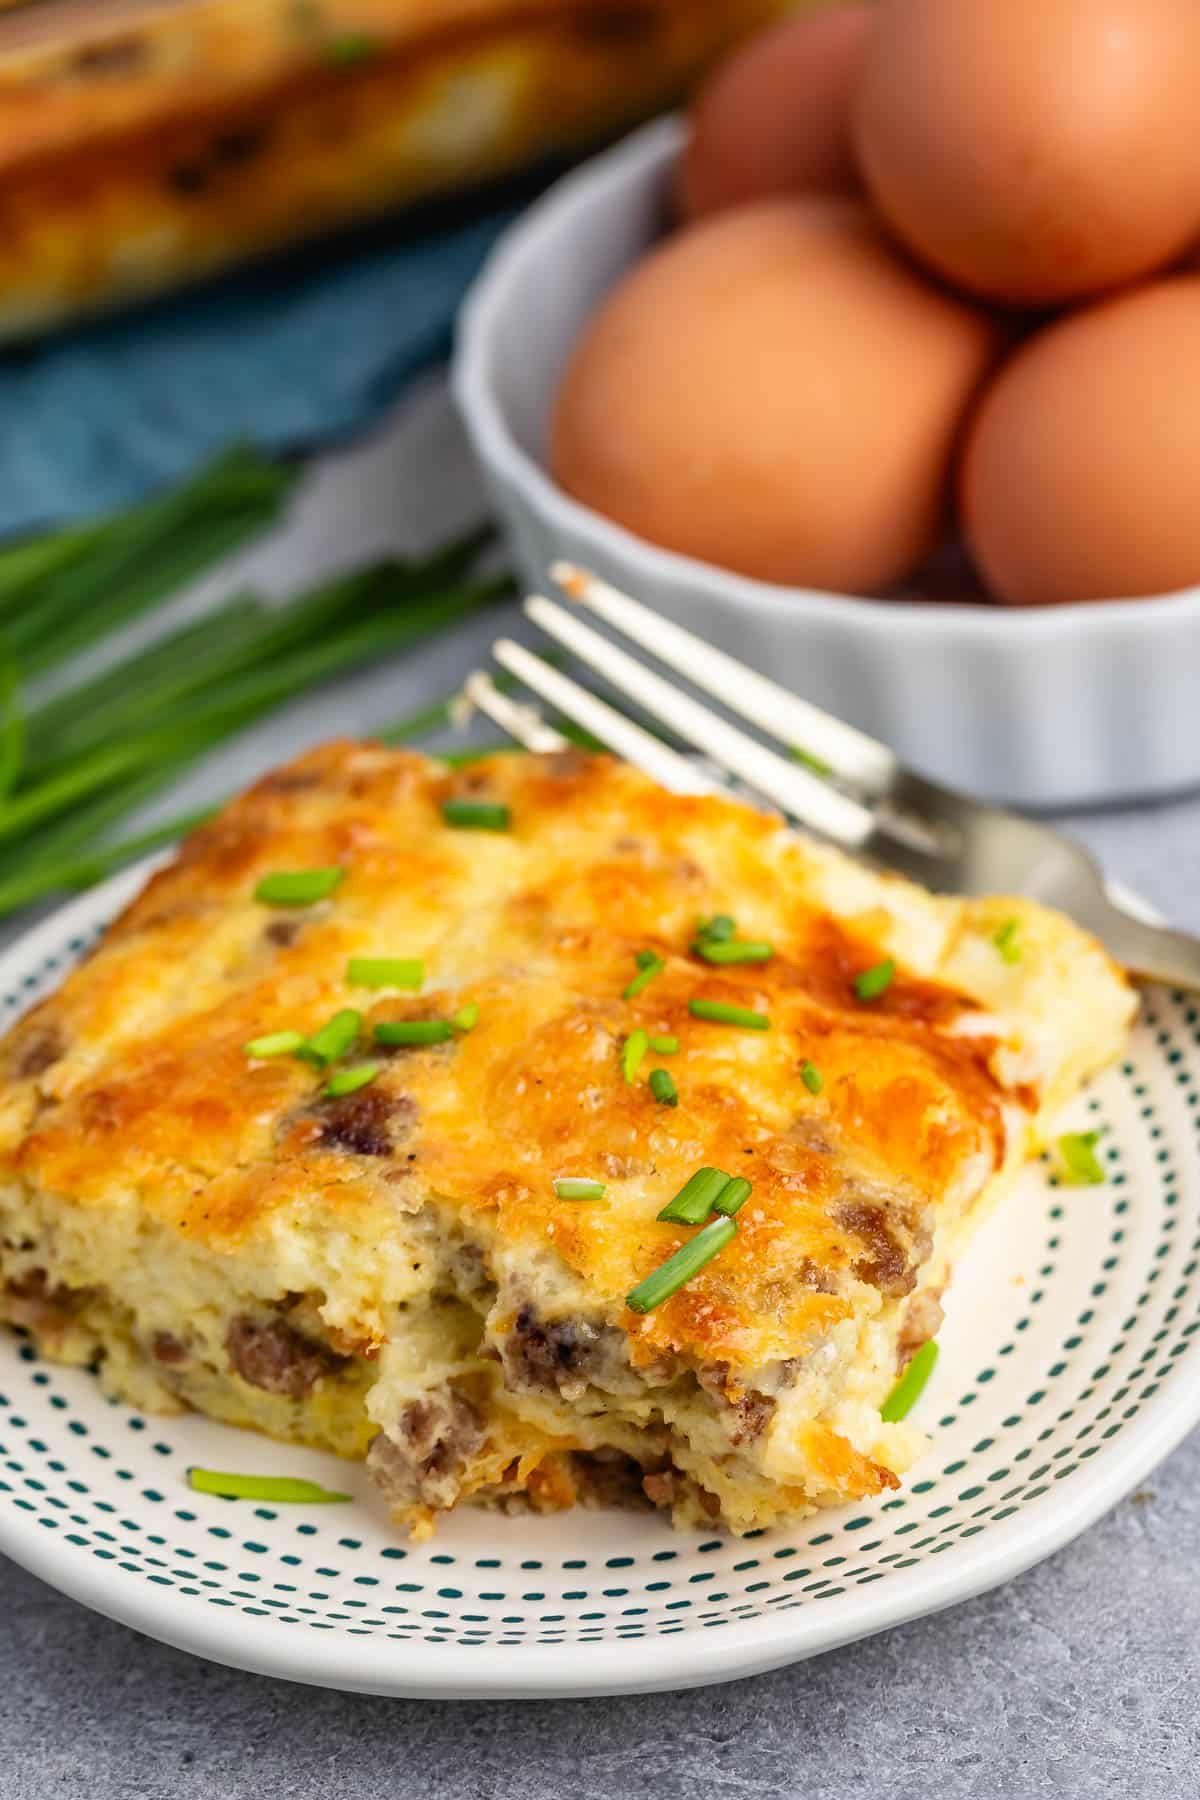 egg casserole with sausage baked in on a white plate.